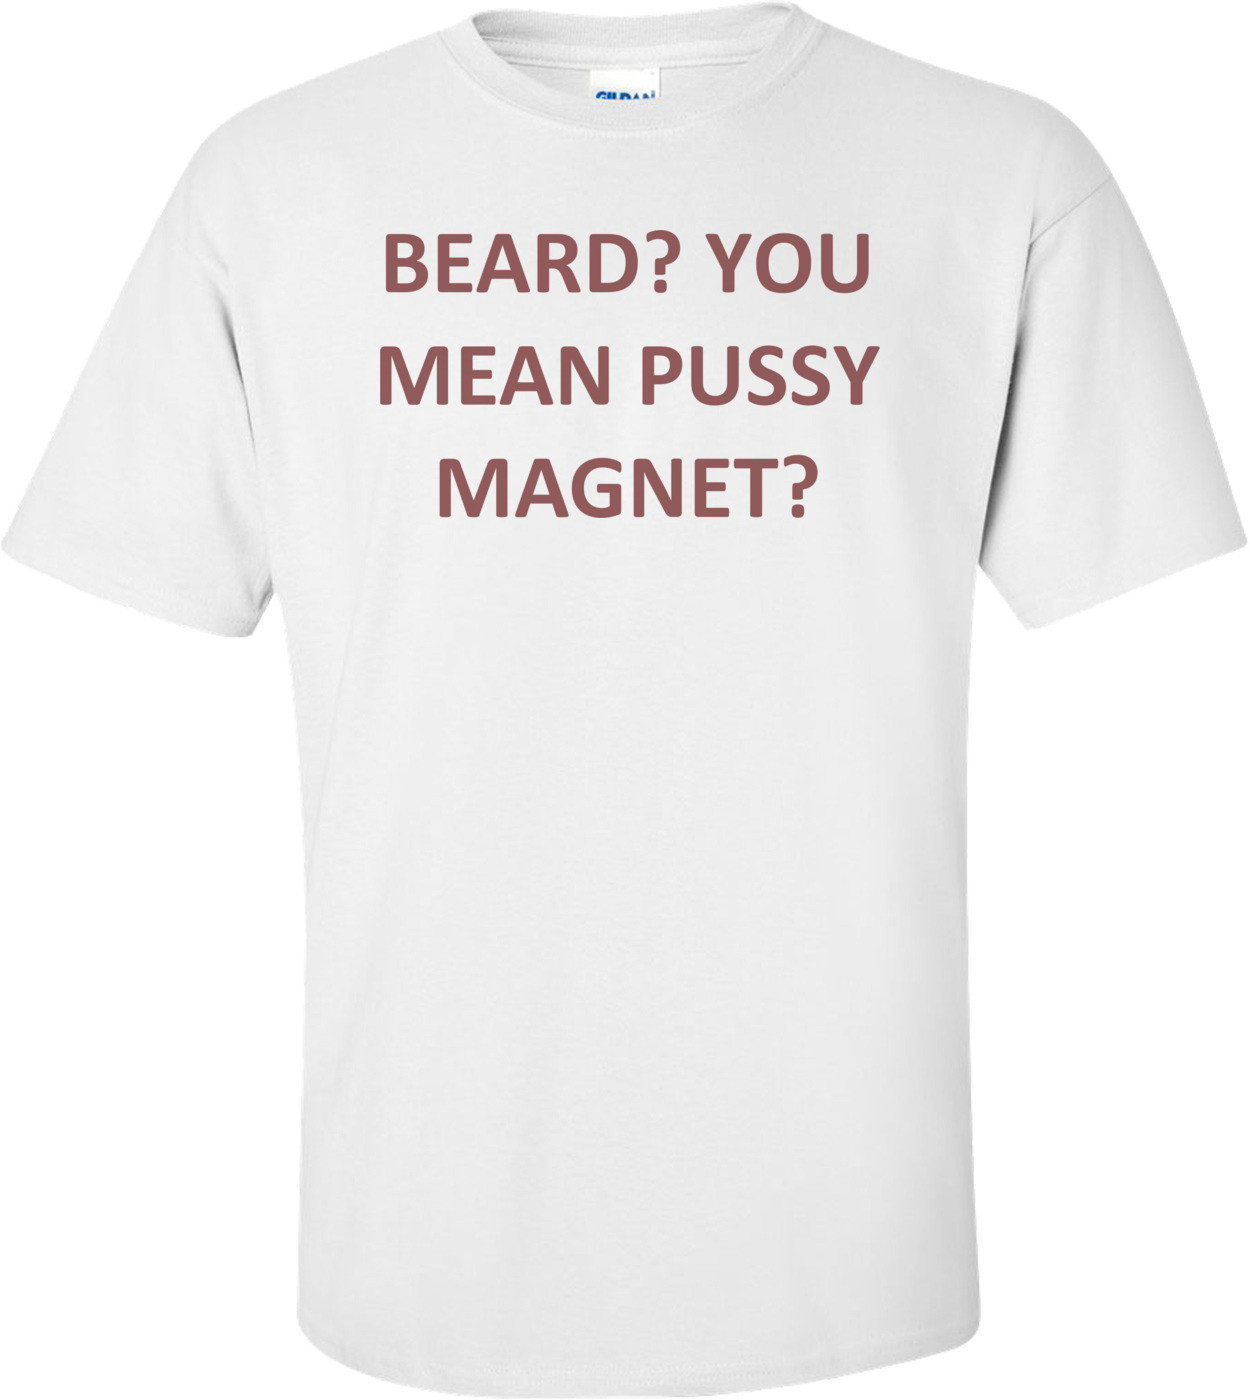 Pussy Magnet T Shirt 104